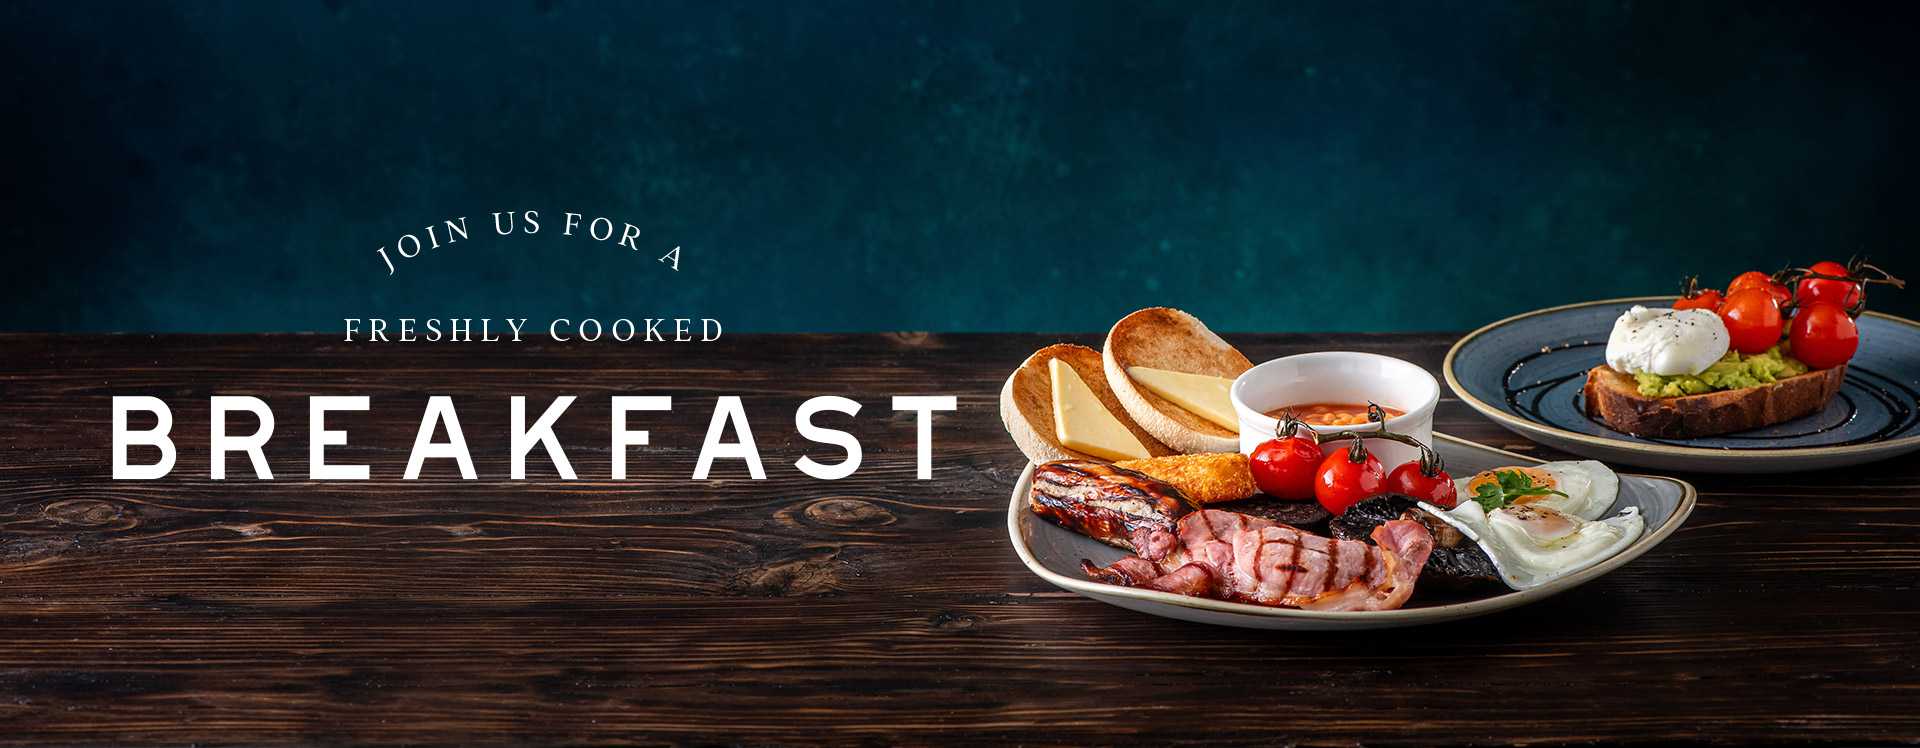 Breakfast at The Falcon - Book a table